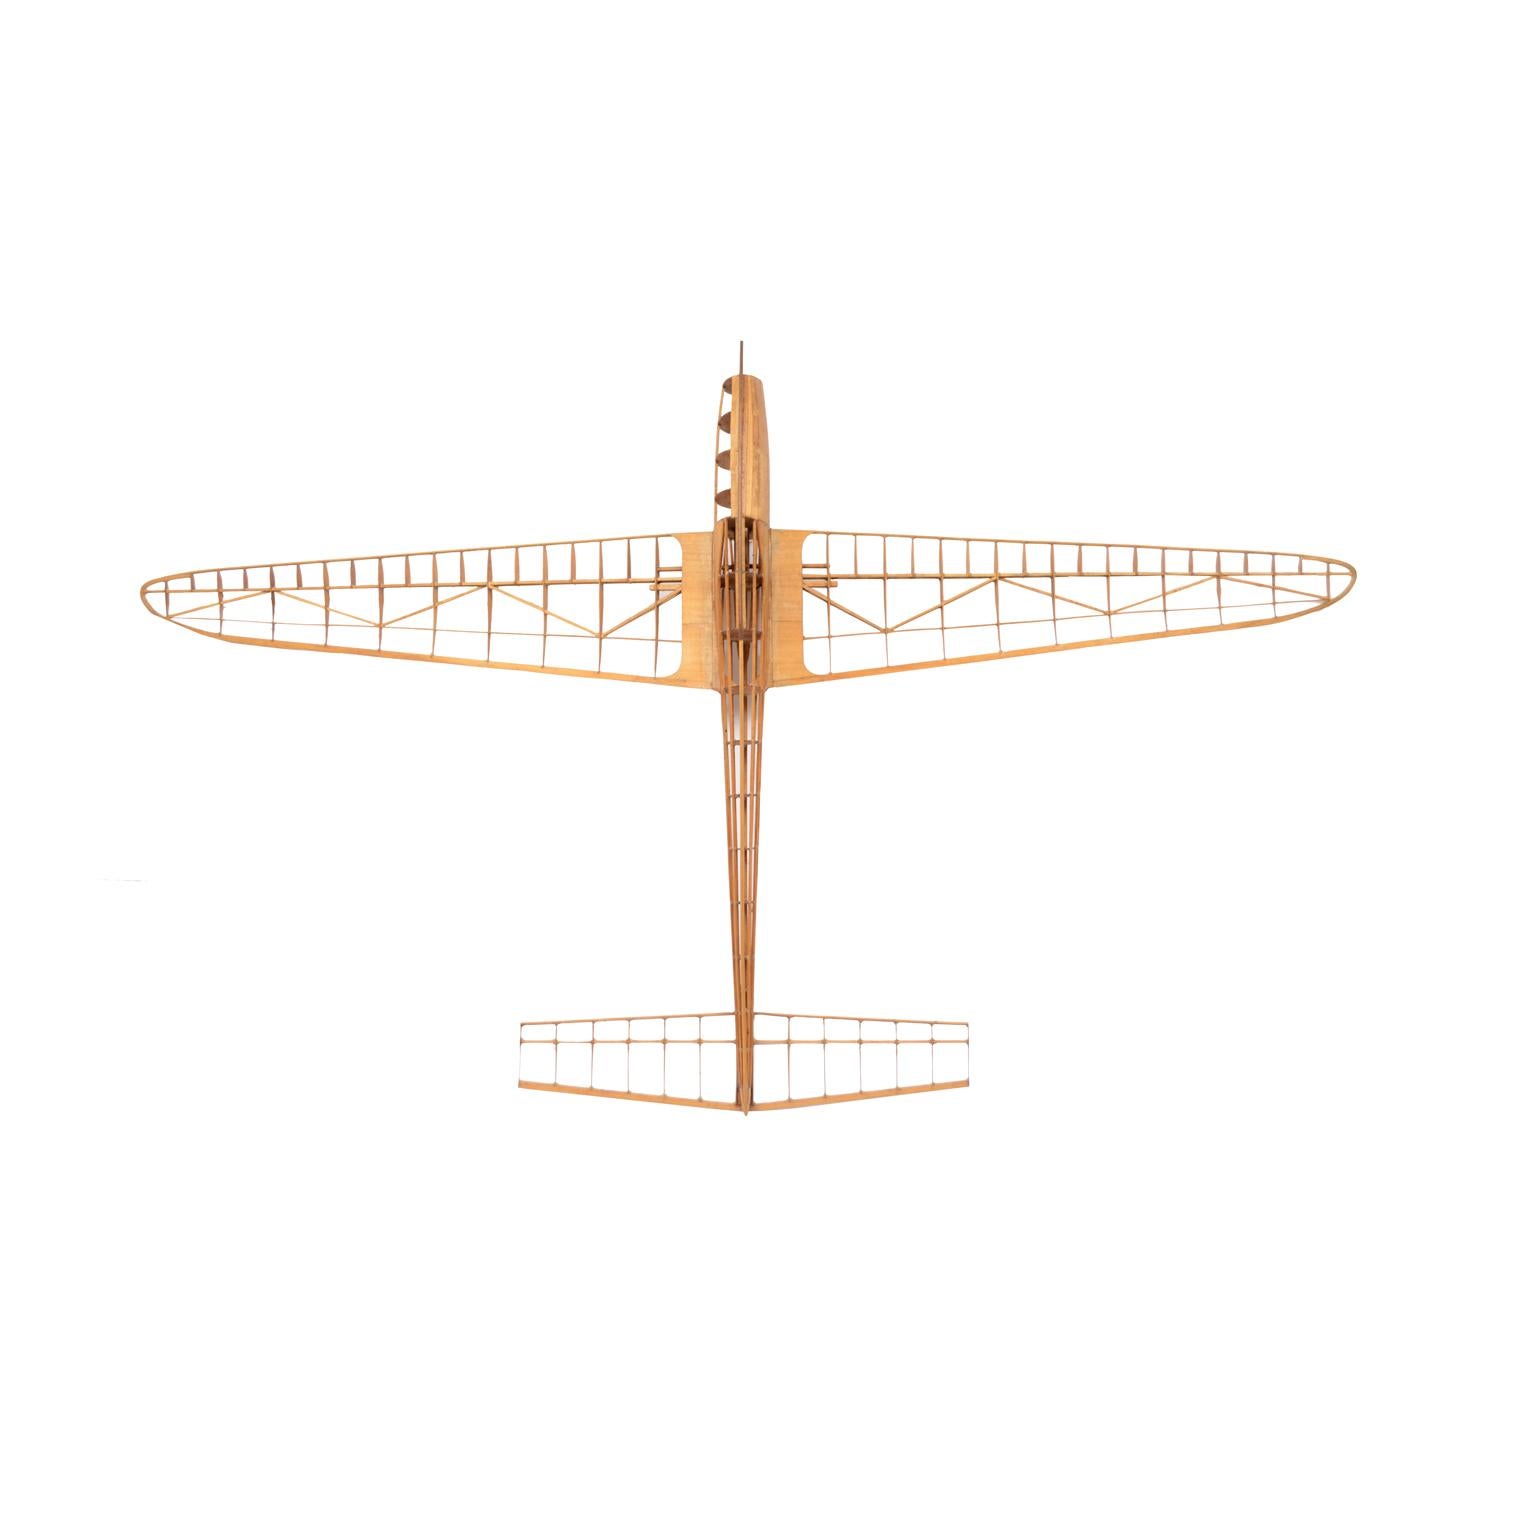 Scale model of the structure of a passenger airplane, made in France in the 1950s. Quotas are written on the various parts of the wings. Made of balsa wood, light but very resistant wood used to build airplanes model. Good condition. Measures: Width